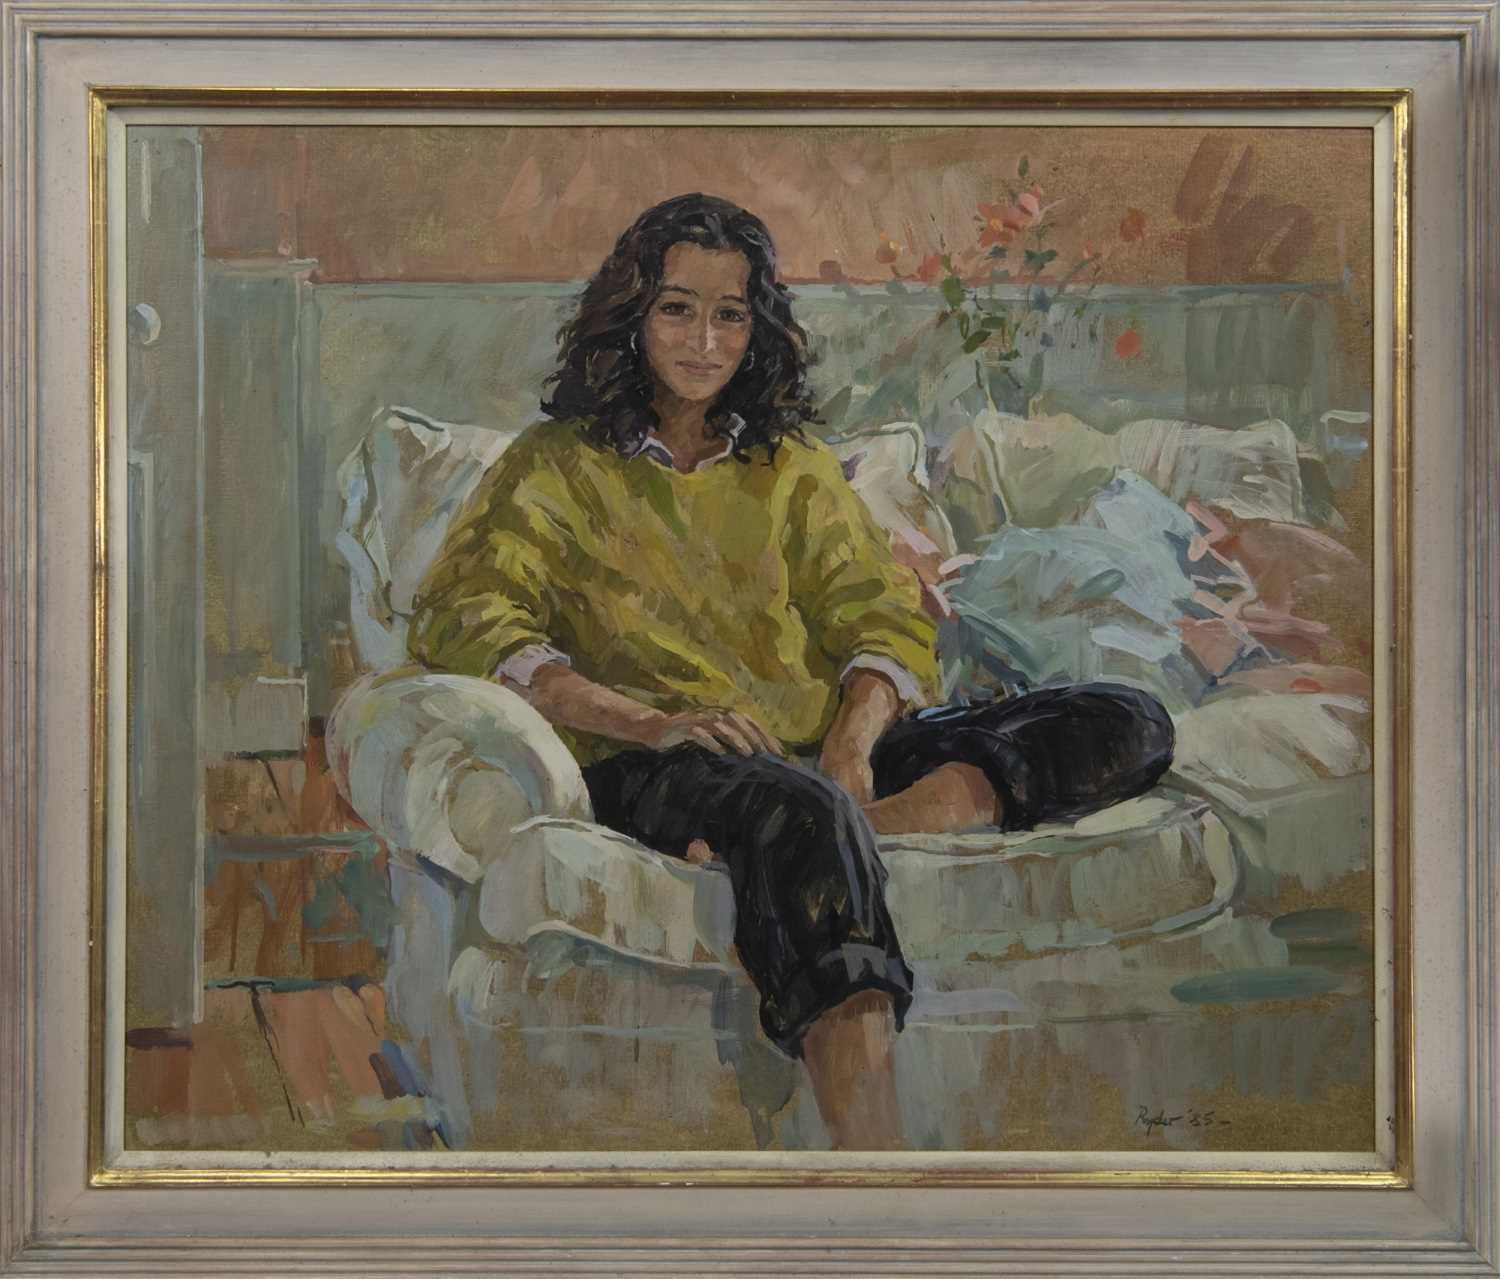 Lot 69 - PORTRAIT OF A WOMAN IN YELLOW, AN OIL BY BY SUSAN RYDER